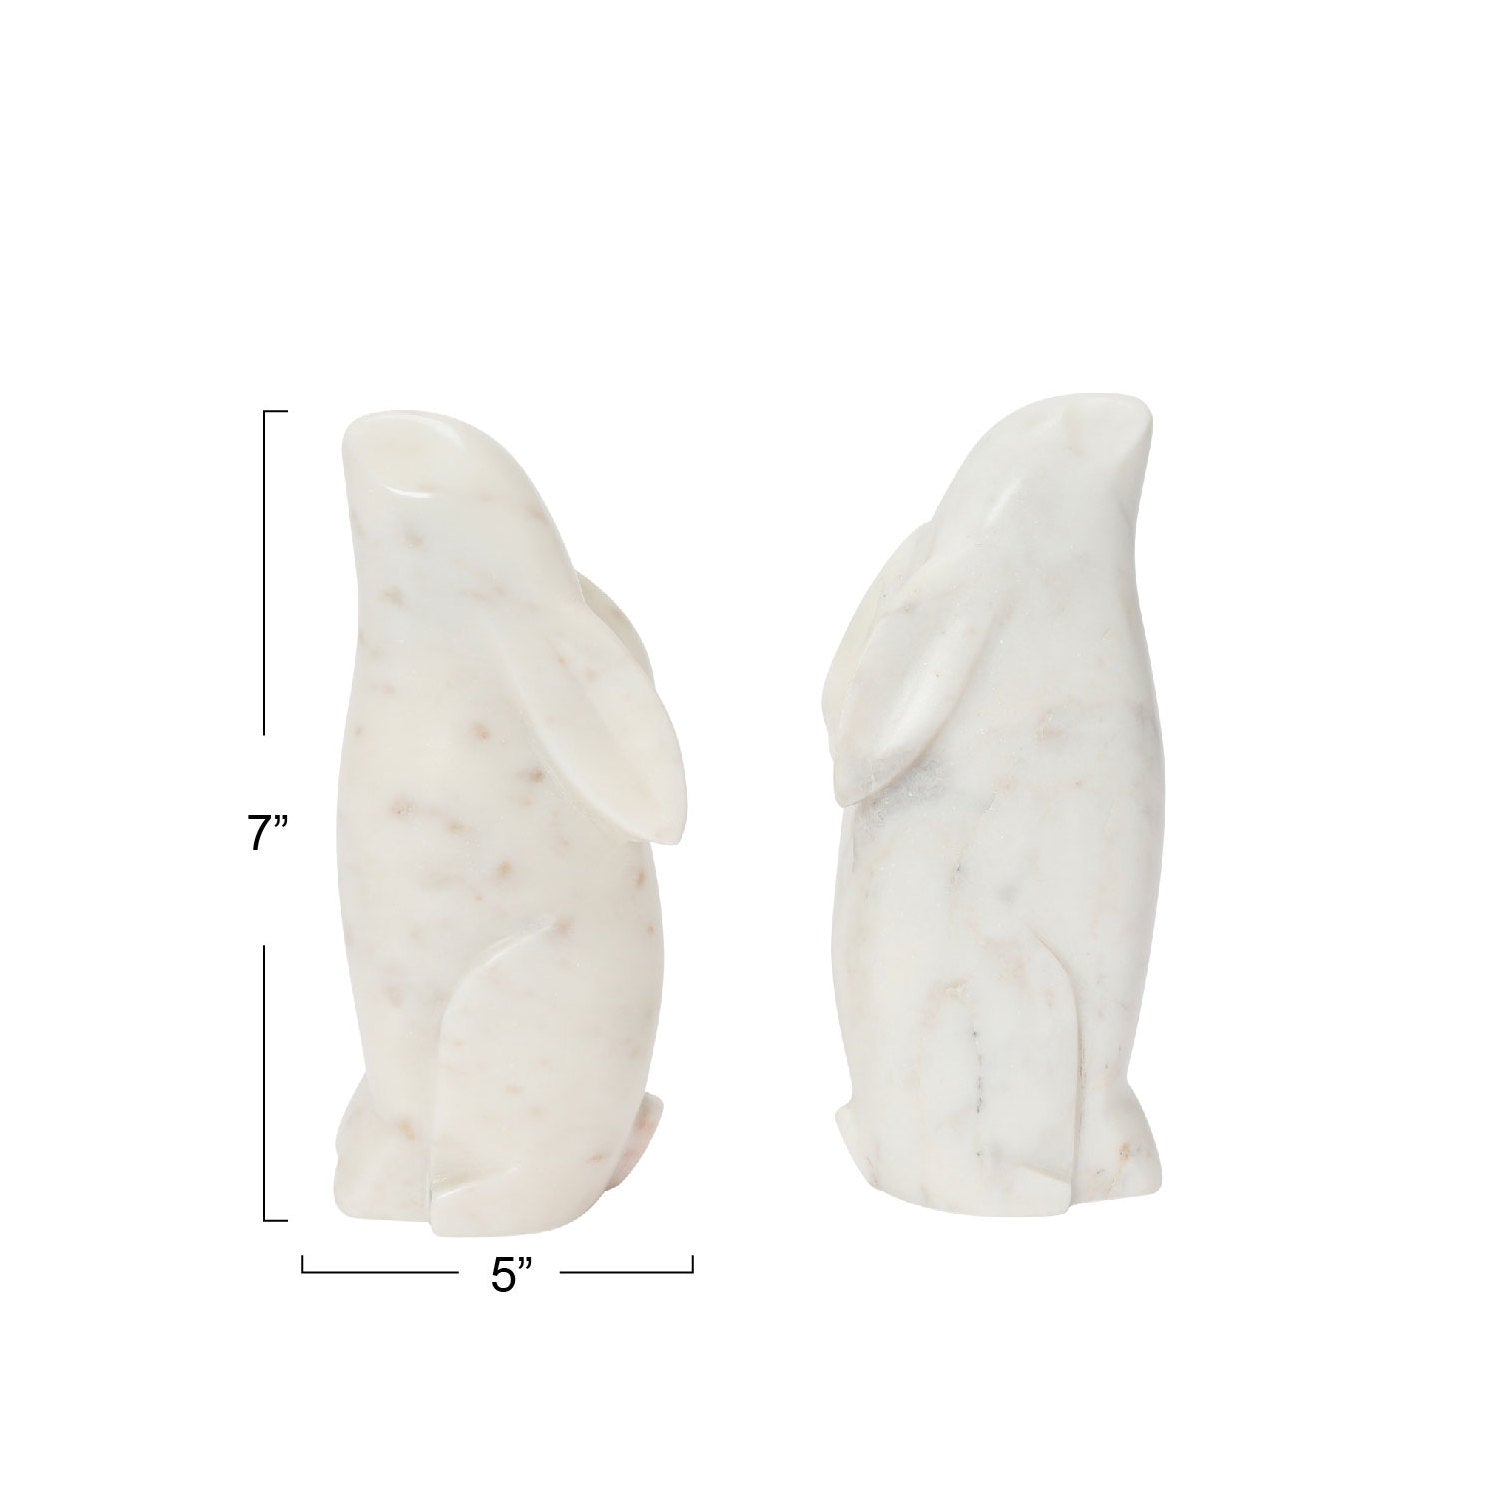 Marble Rabbit Bookends measure approximately 7 inches high by 5 inches wide. 